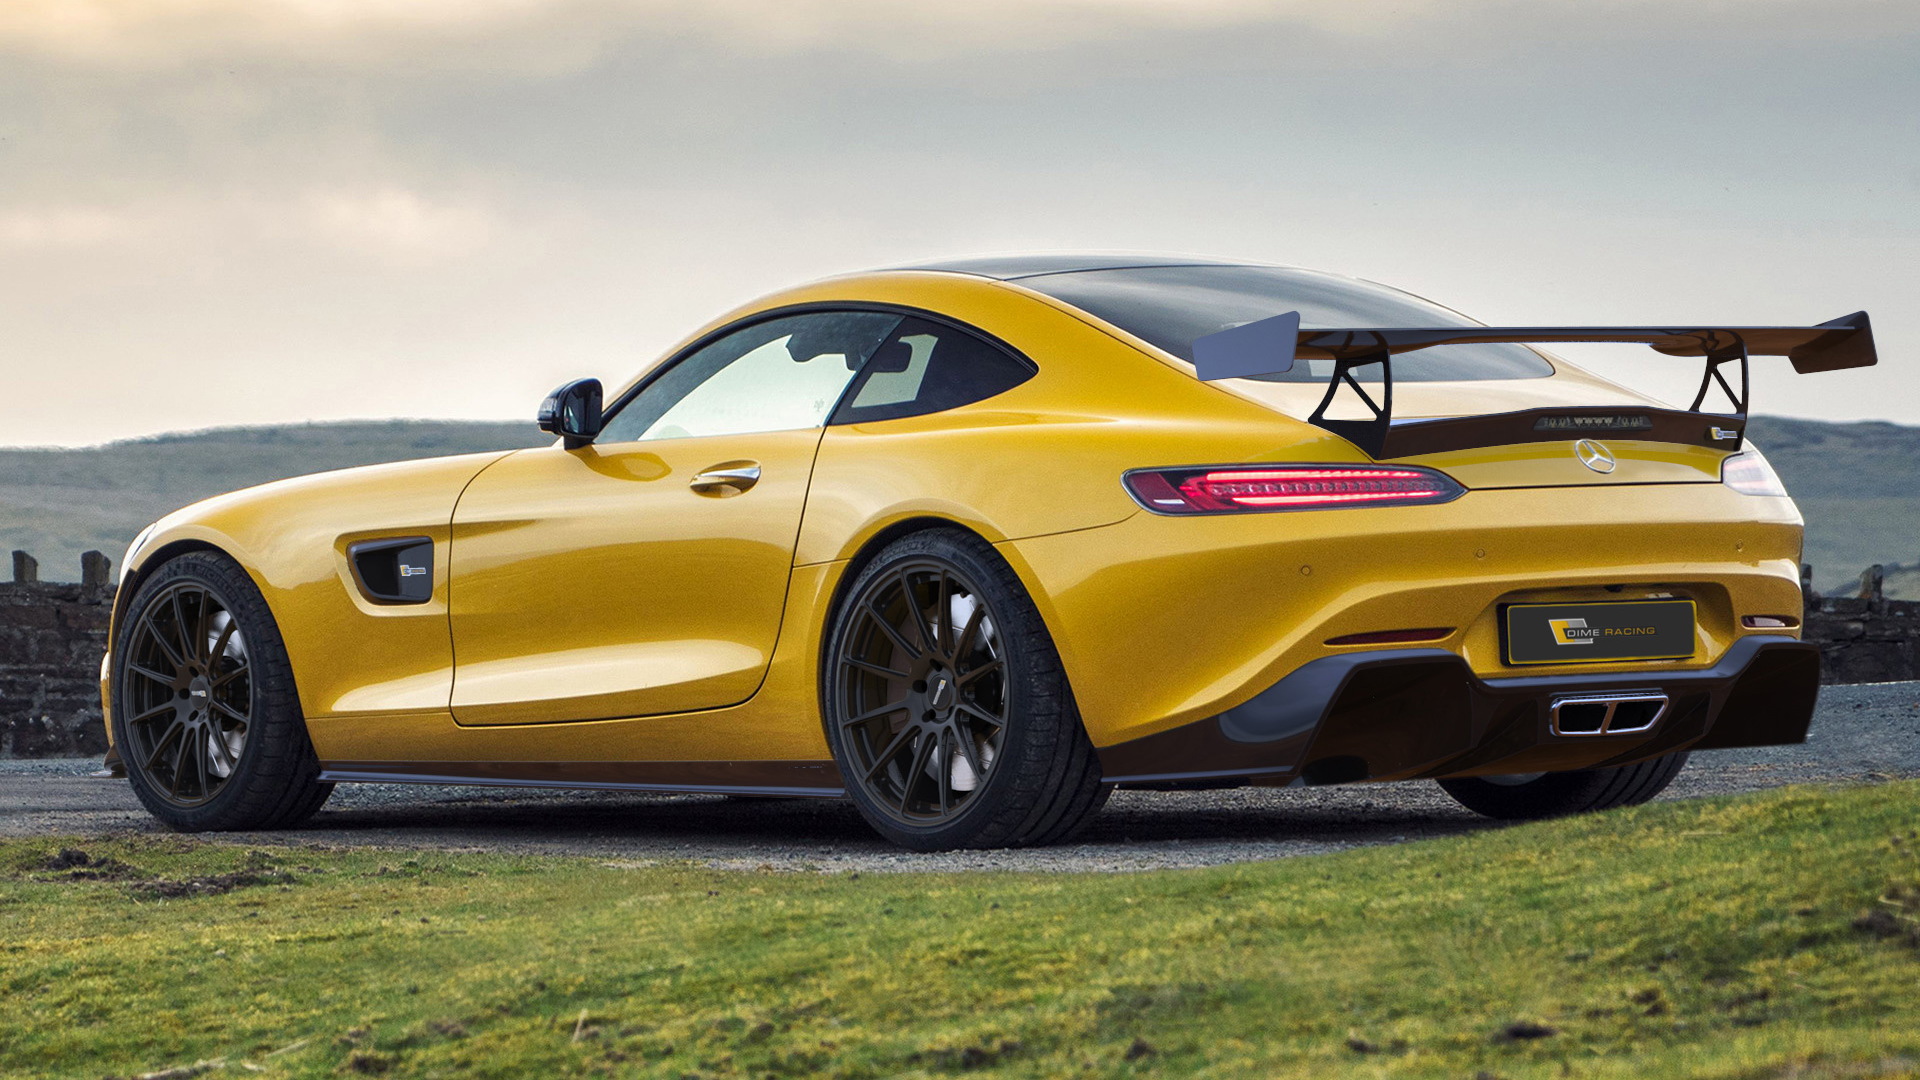 2017 Mercedes-AMG GT by Dime Racing